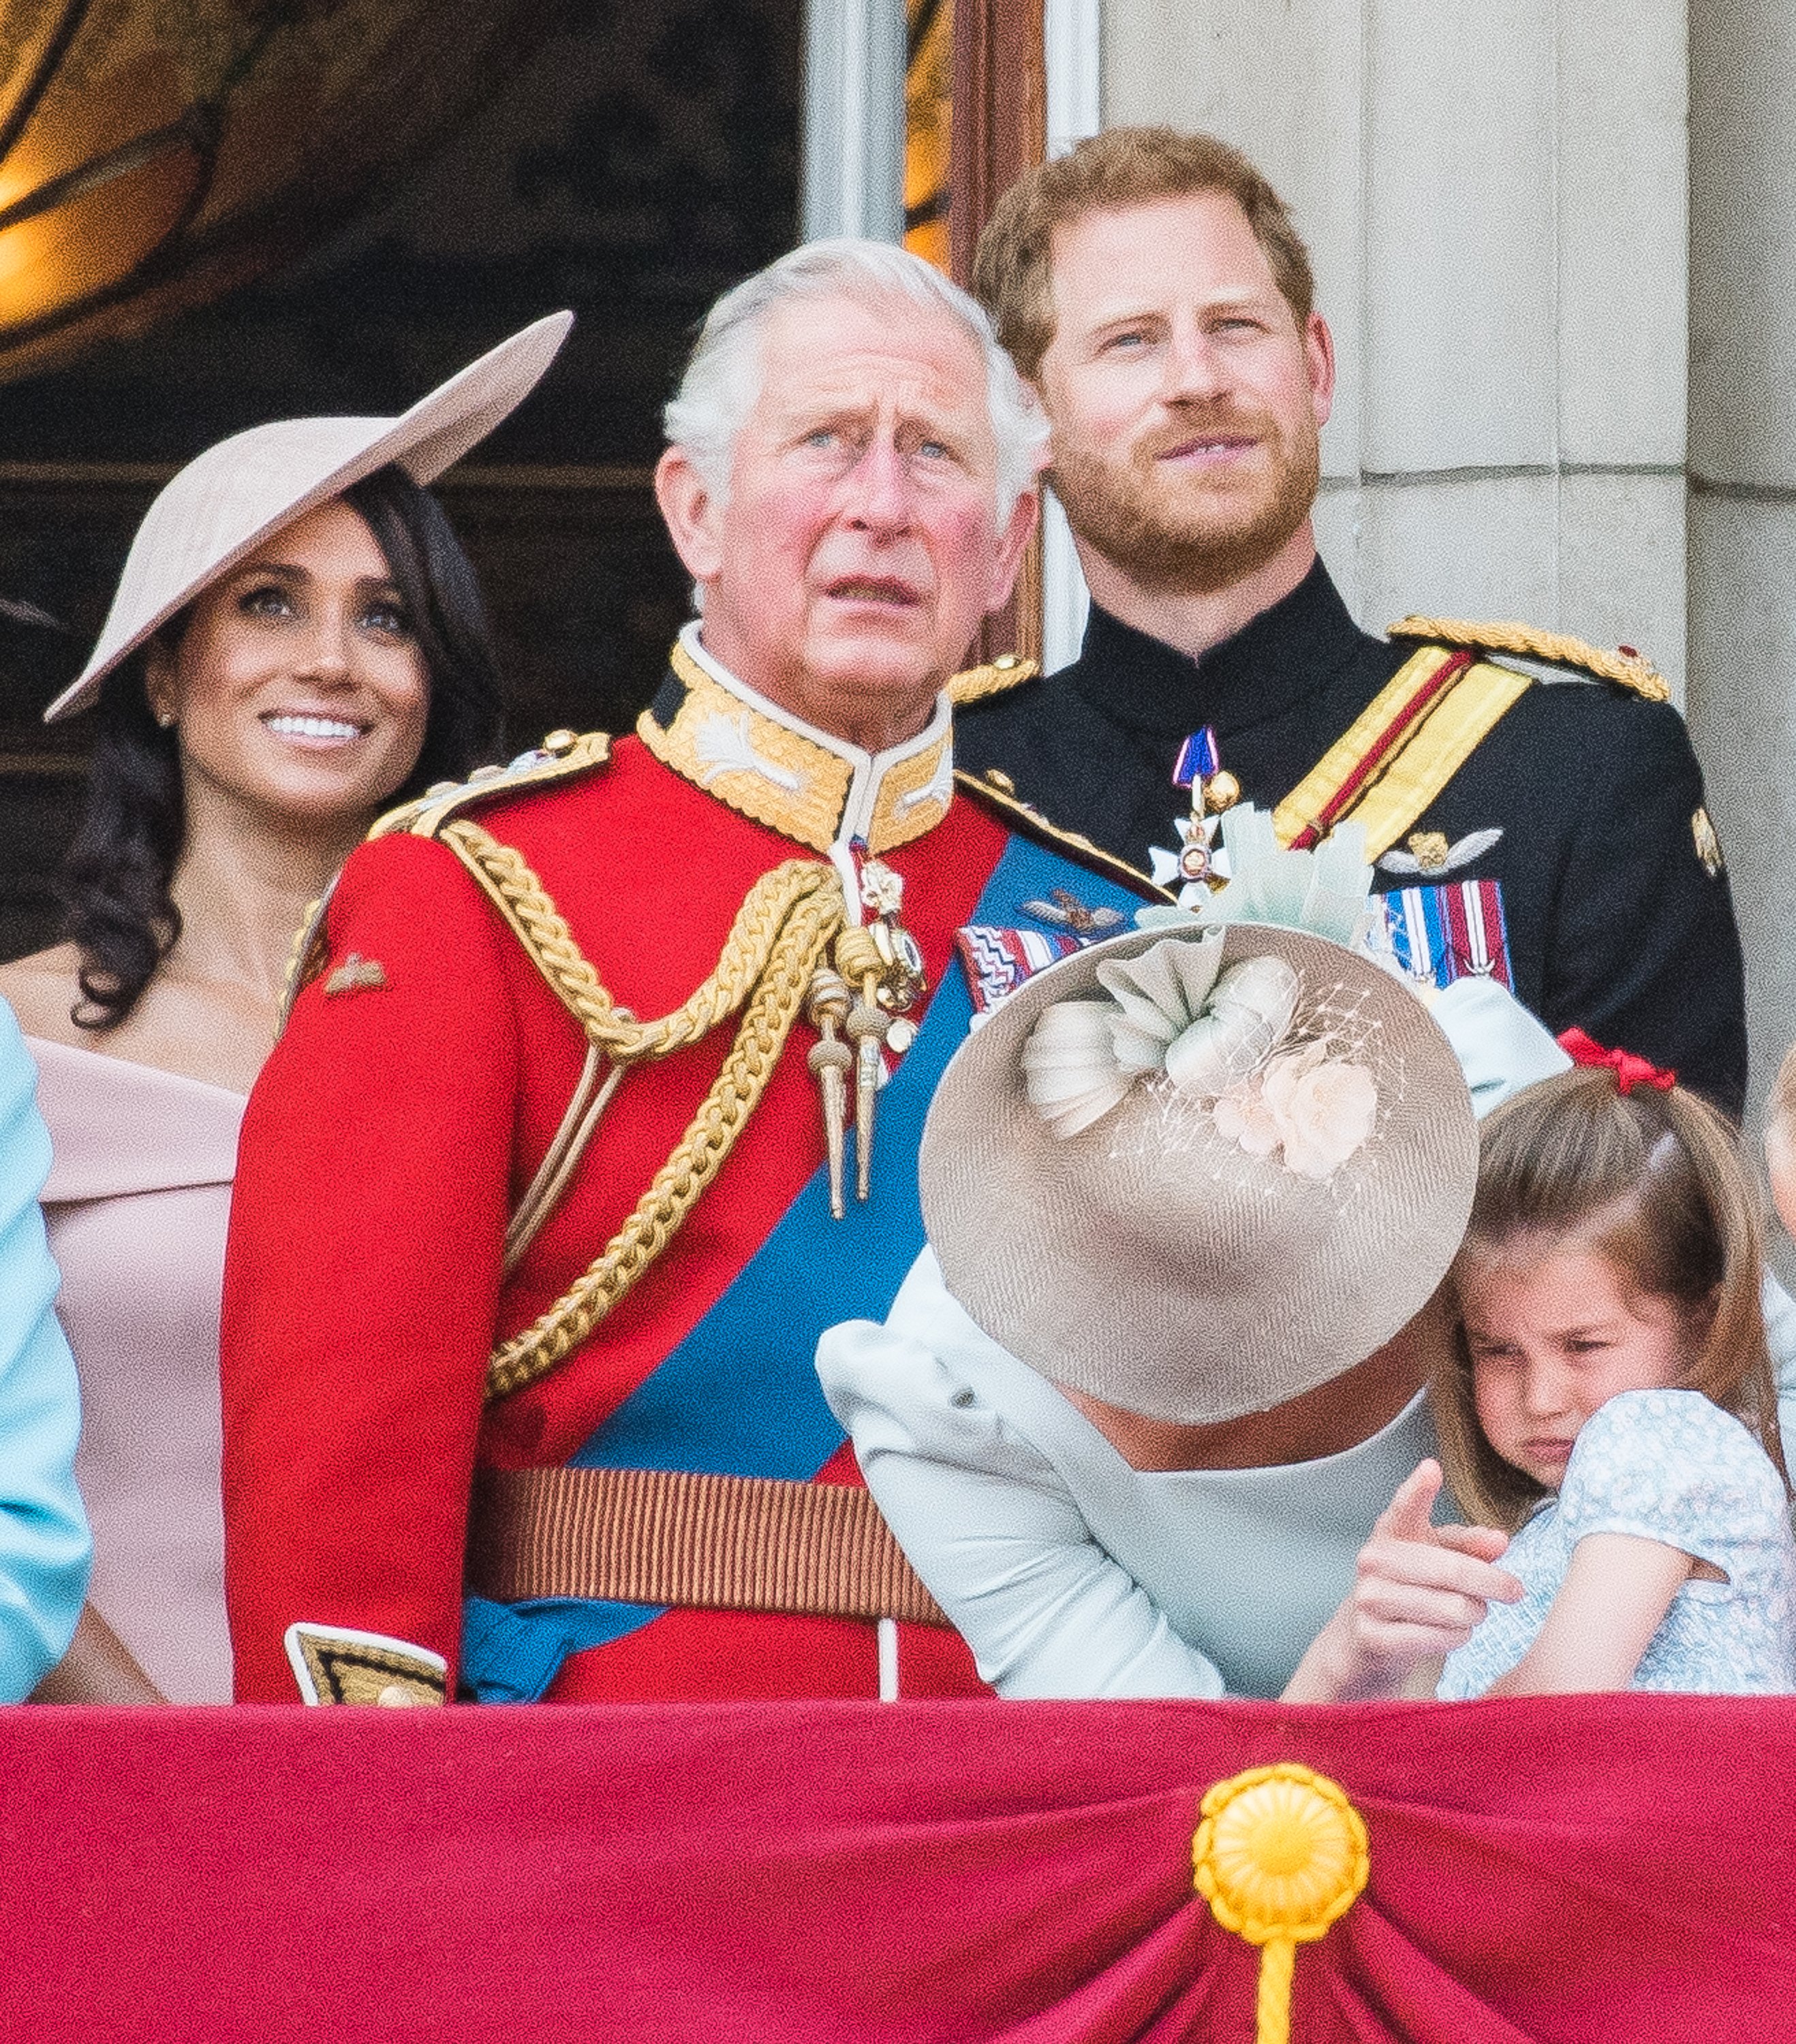 Prince Charles, Prince Harry, Meghan Markle, Kate Middleton and Princess Charlotte in London 2018. | Source: Getty Images